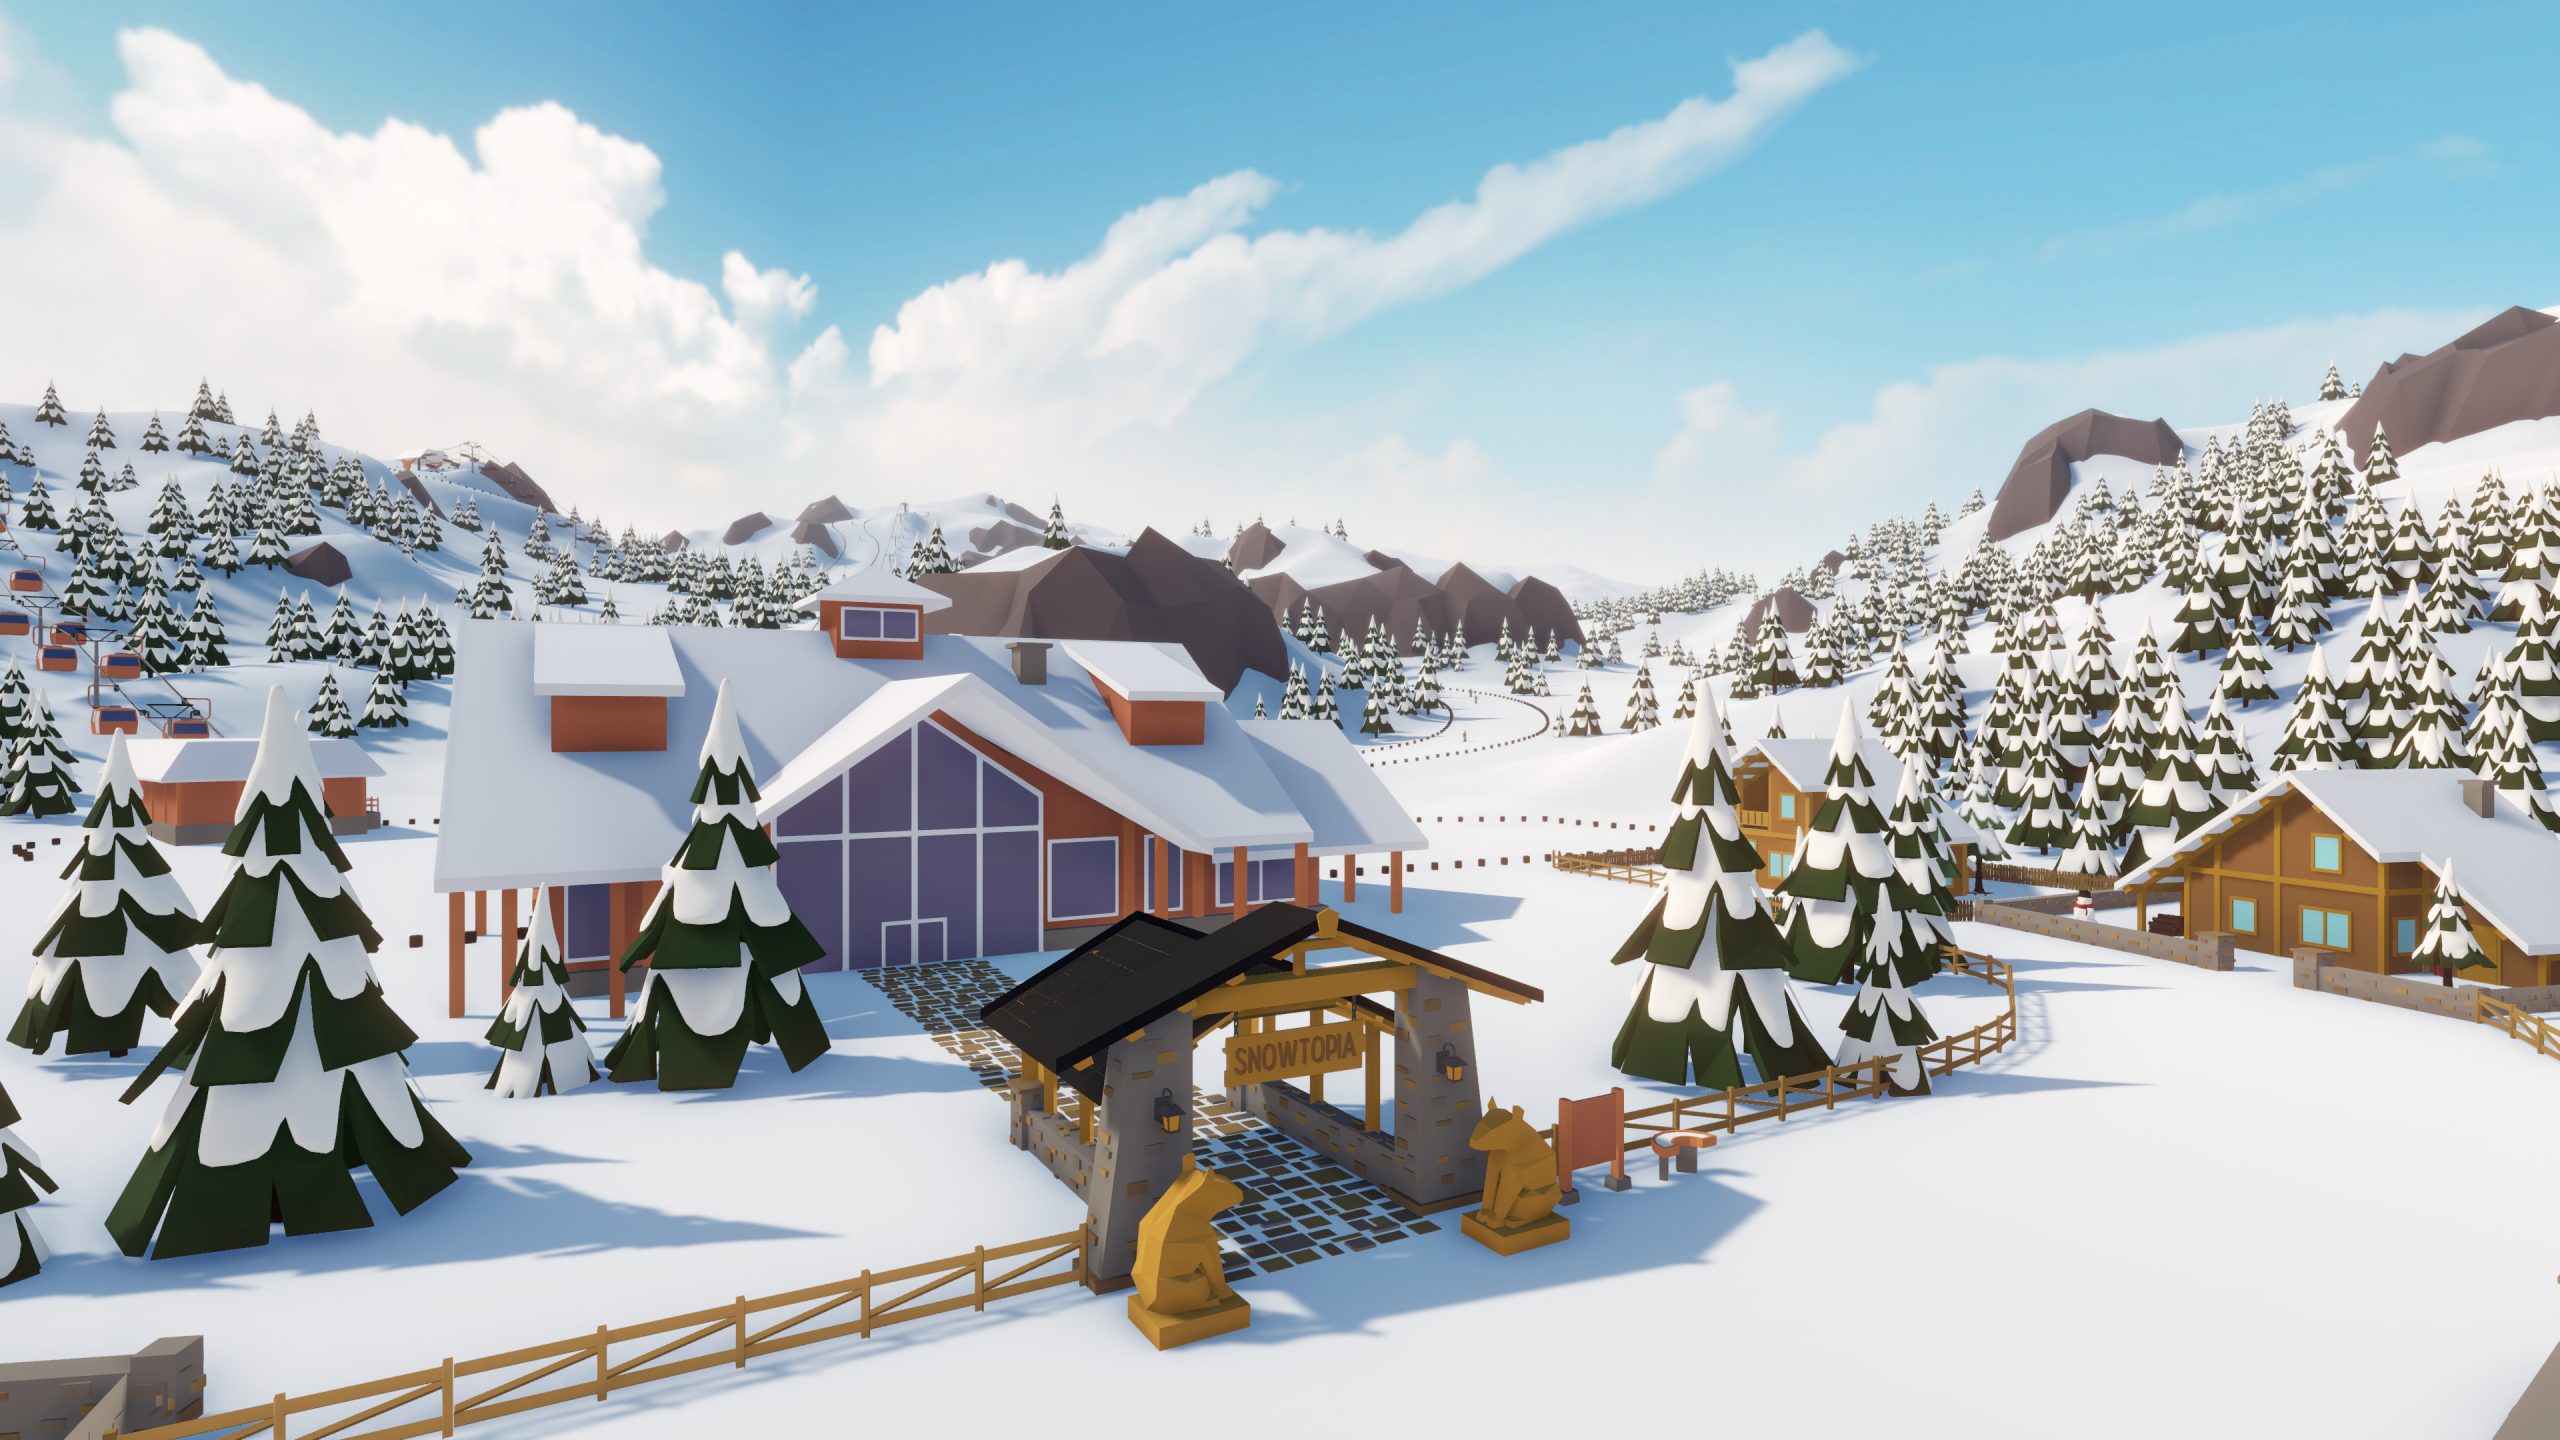 Snowtopia: Ski Resort Tycoon Is a Tycoon Game Set in a Snowy Wonderland